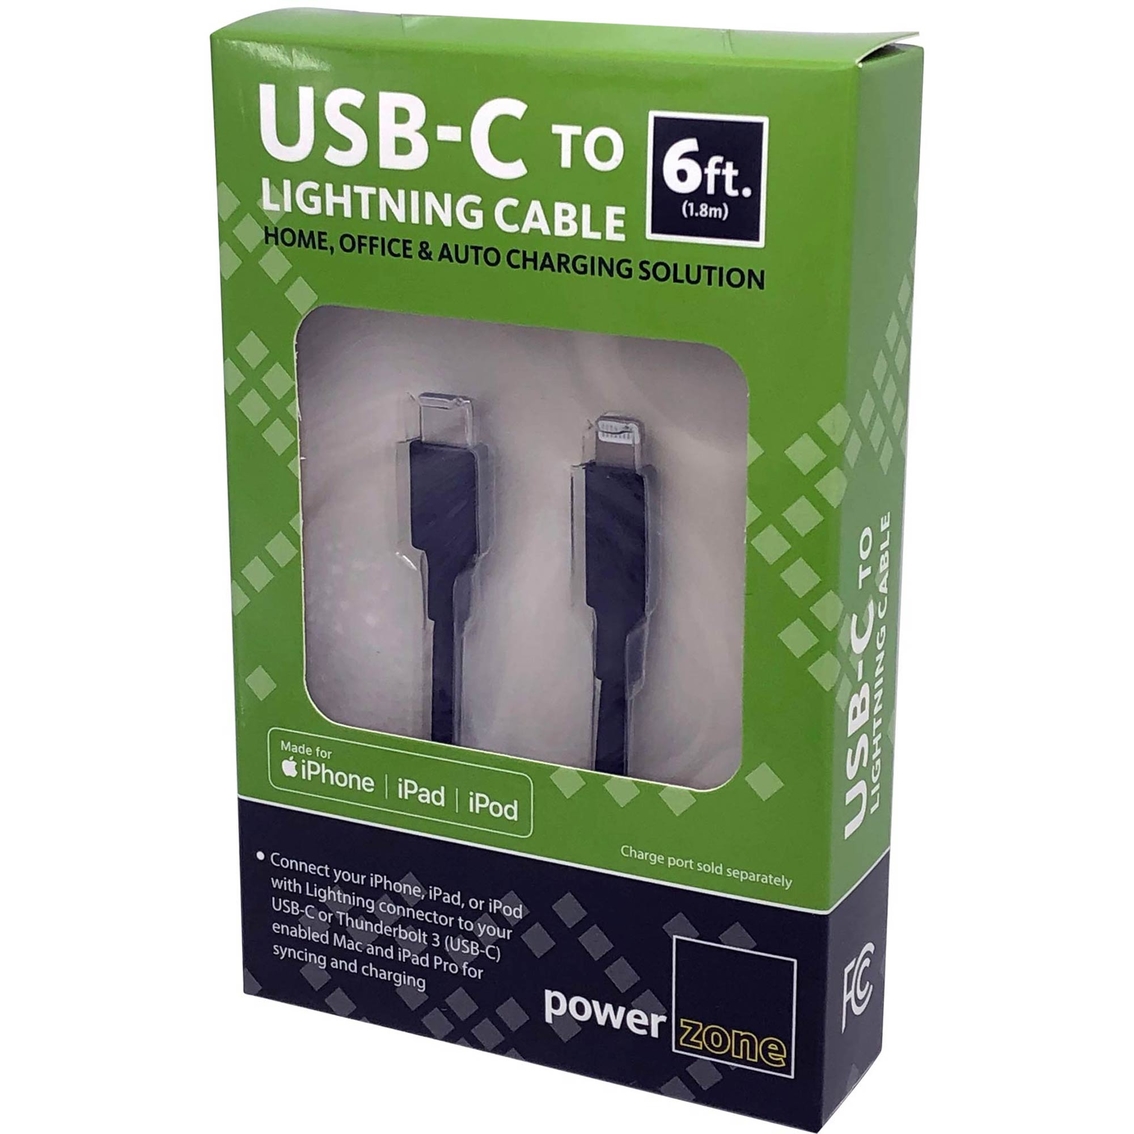 USB Type C to Lightning Cable 6ft Black - Image 3 of 3